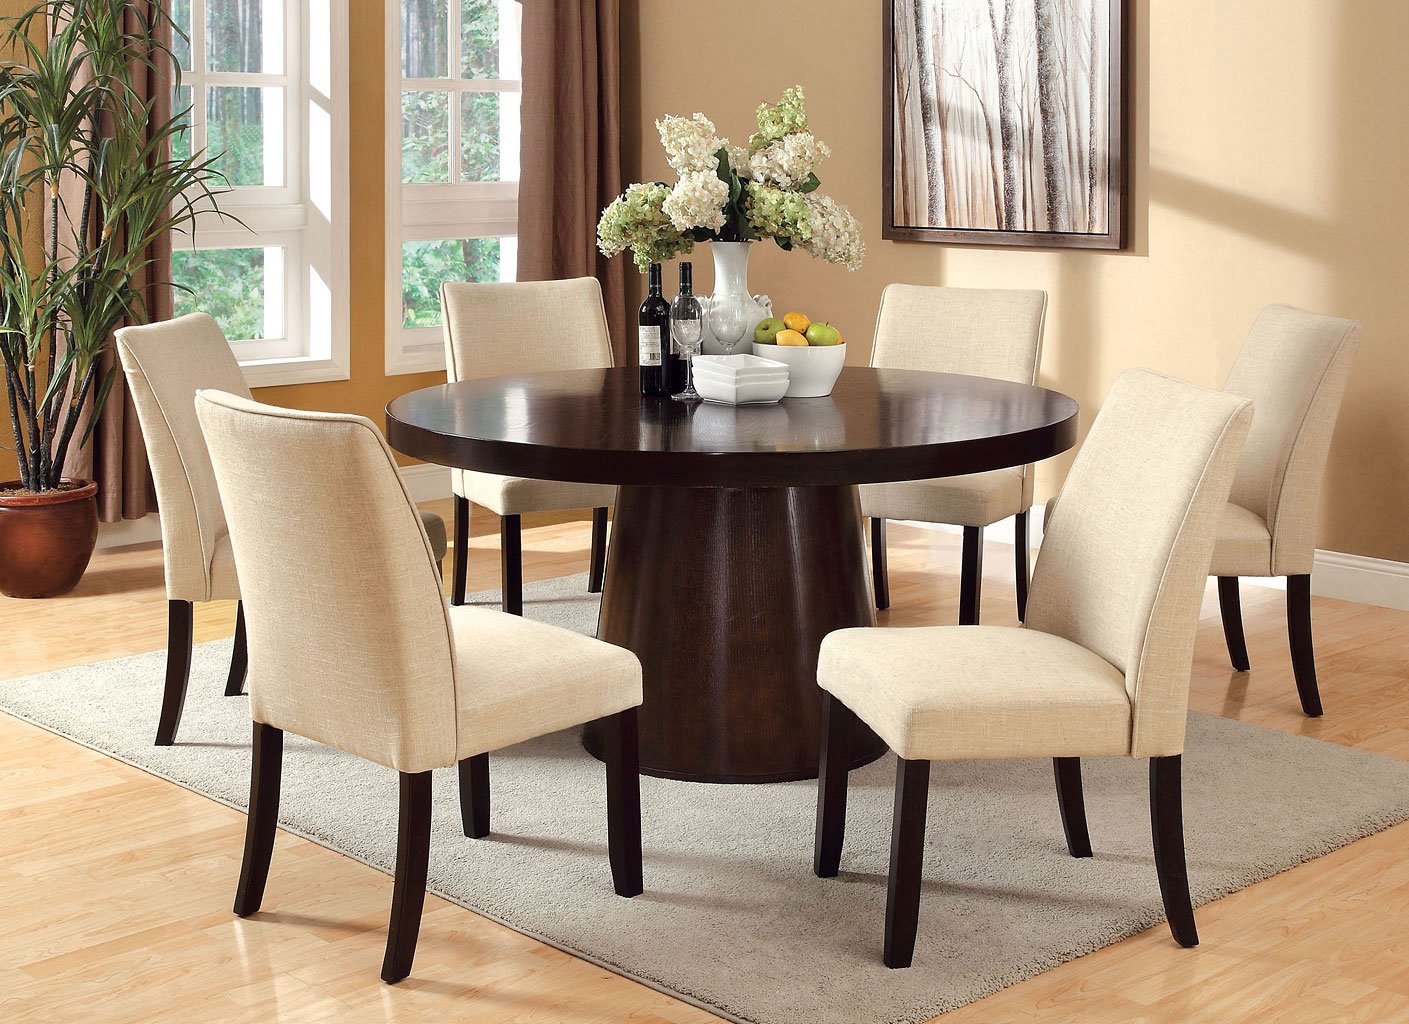 Havana Round Dining Room Set w/ Cimma Chairs - Casual Dining Sets